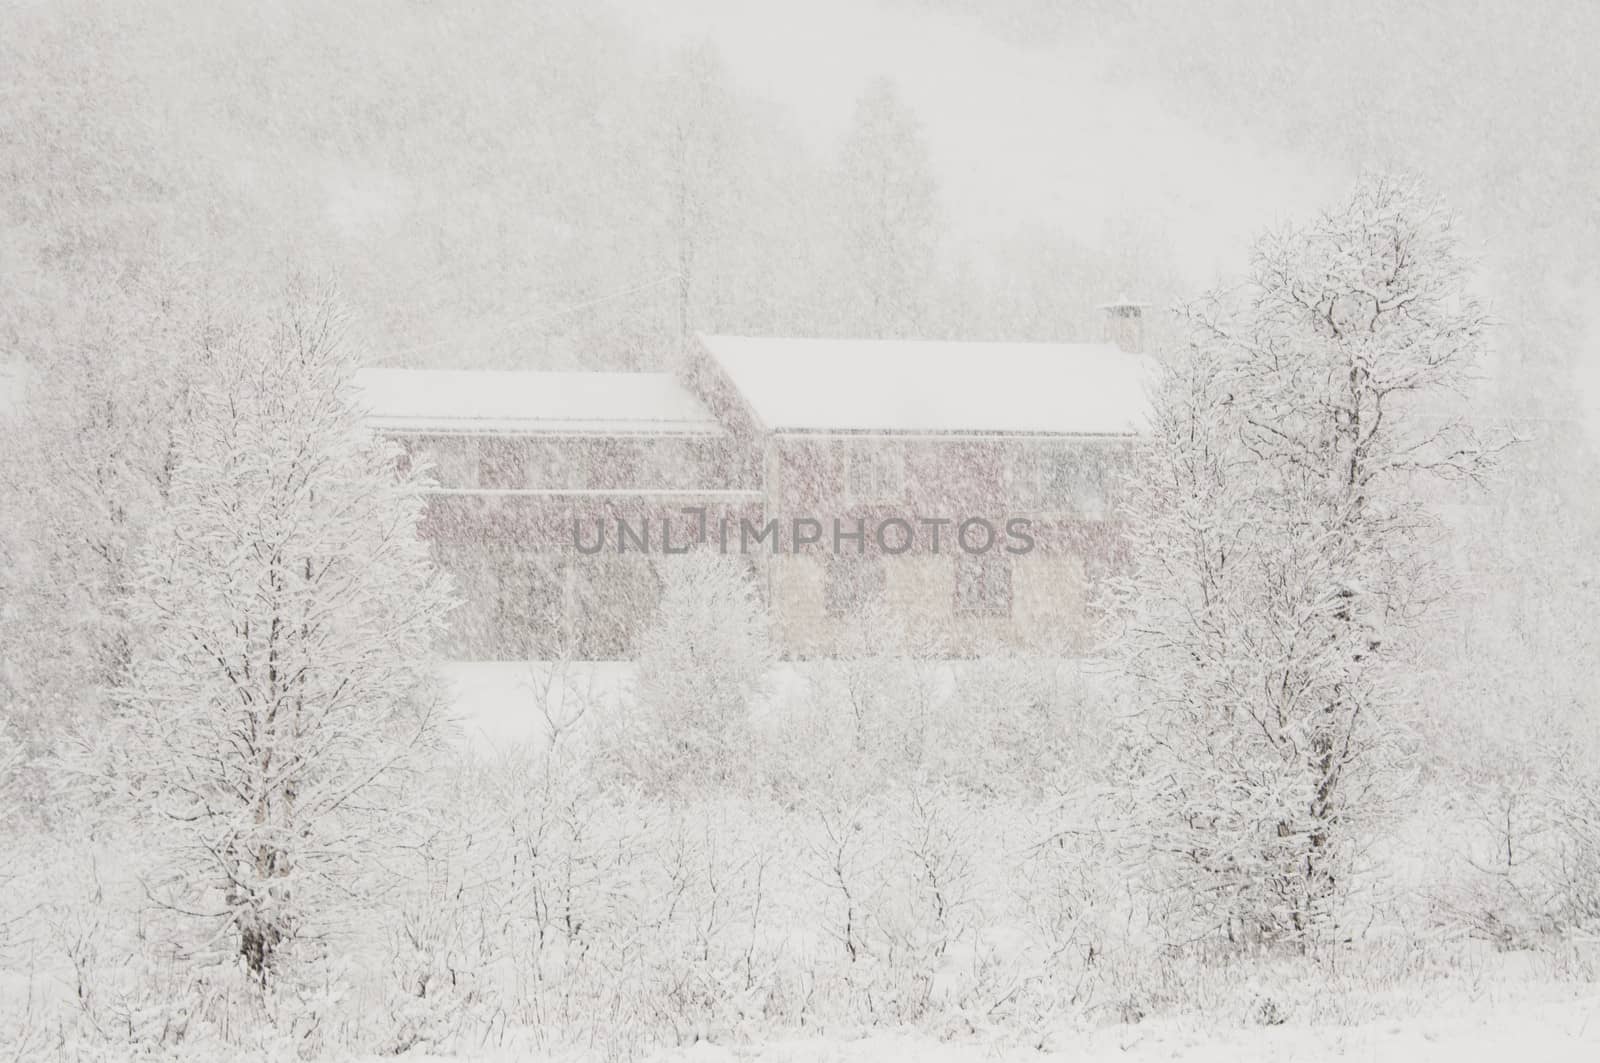 Red house in heavy snowfall by GryT